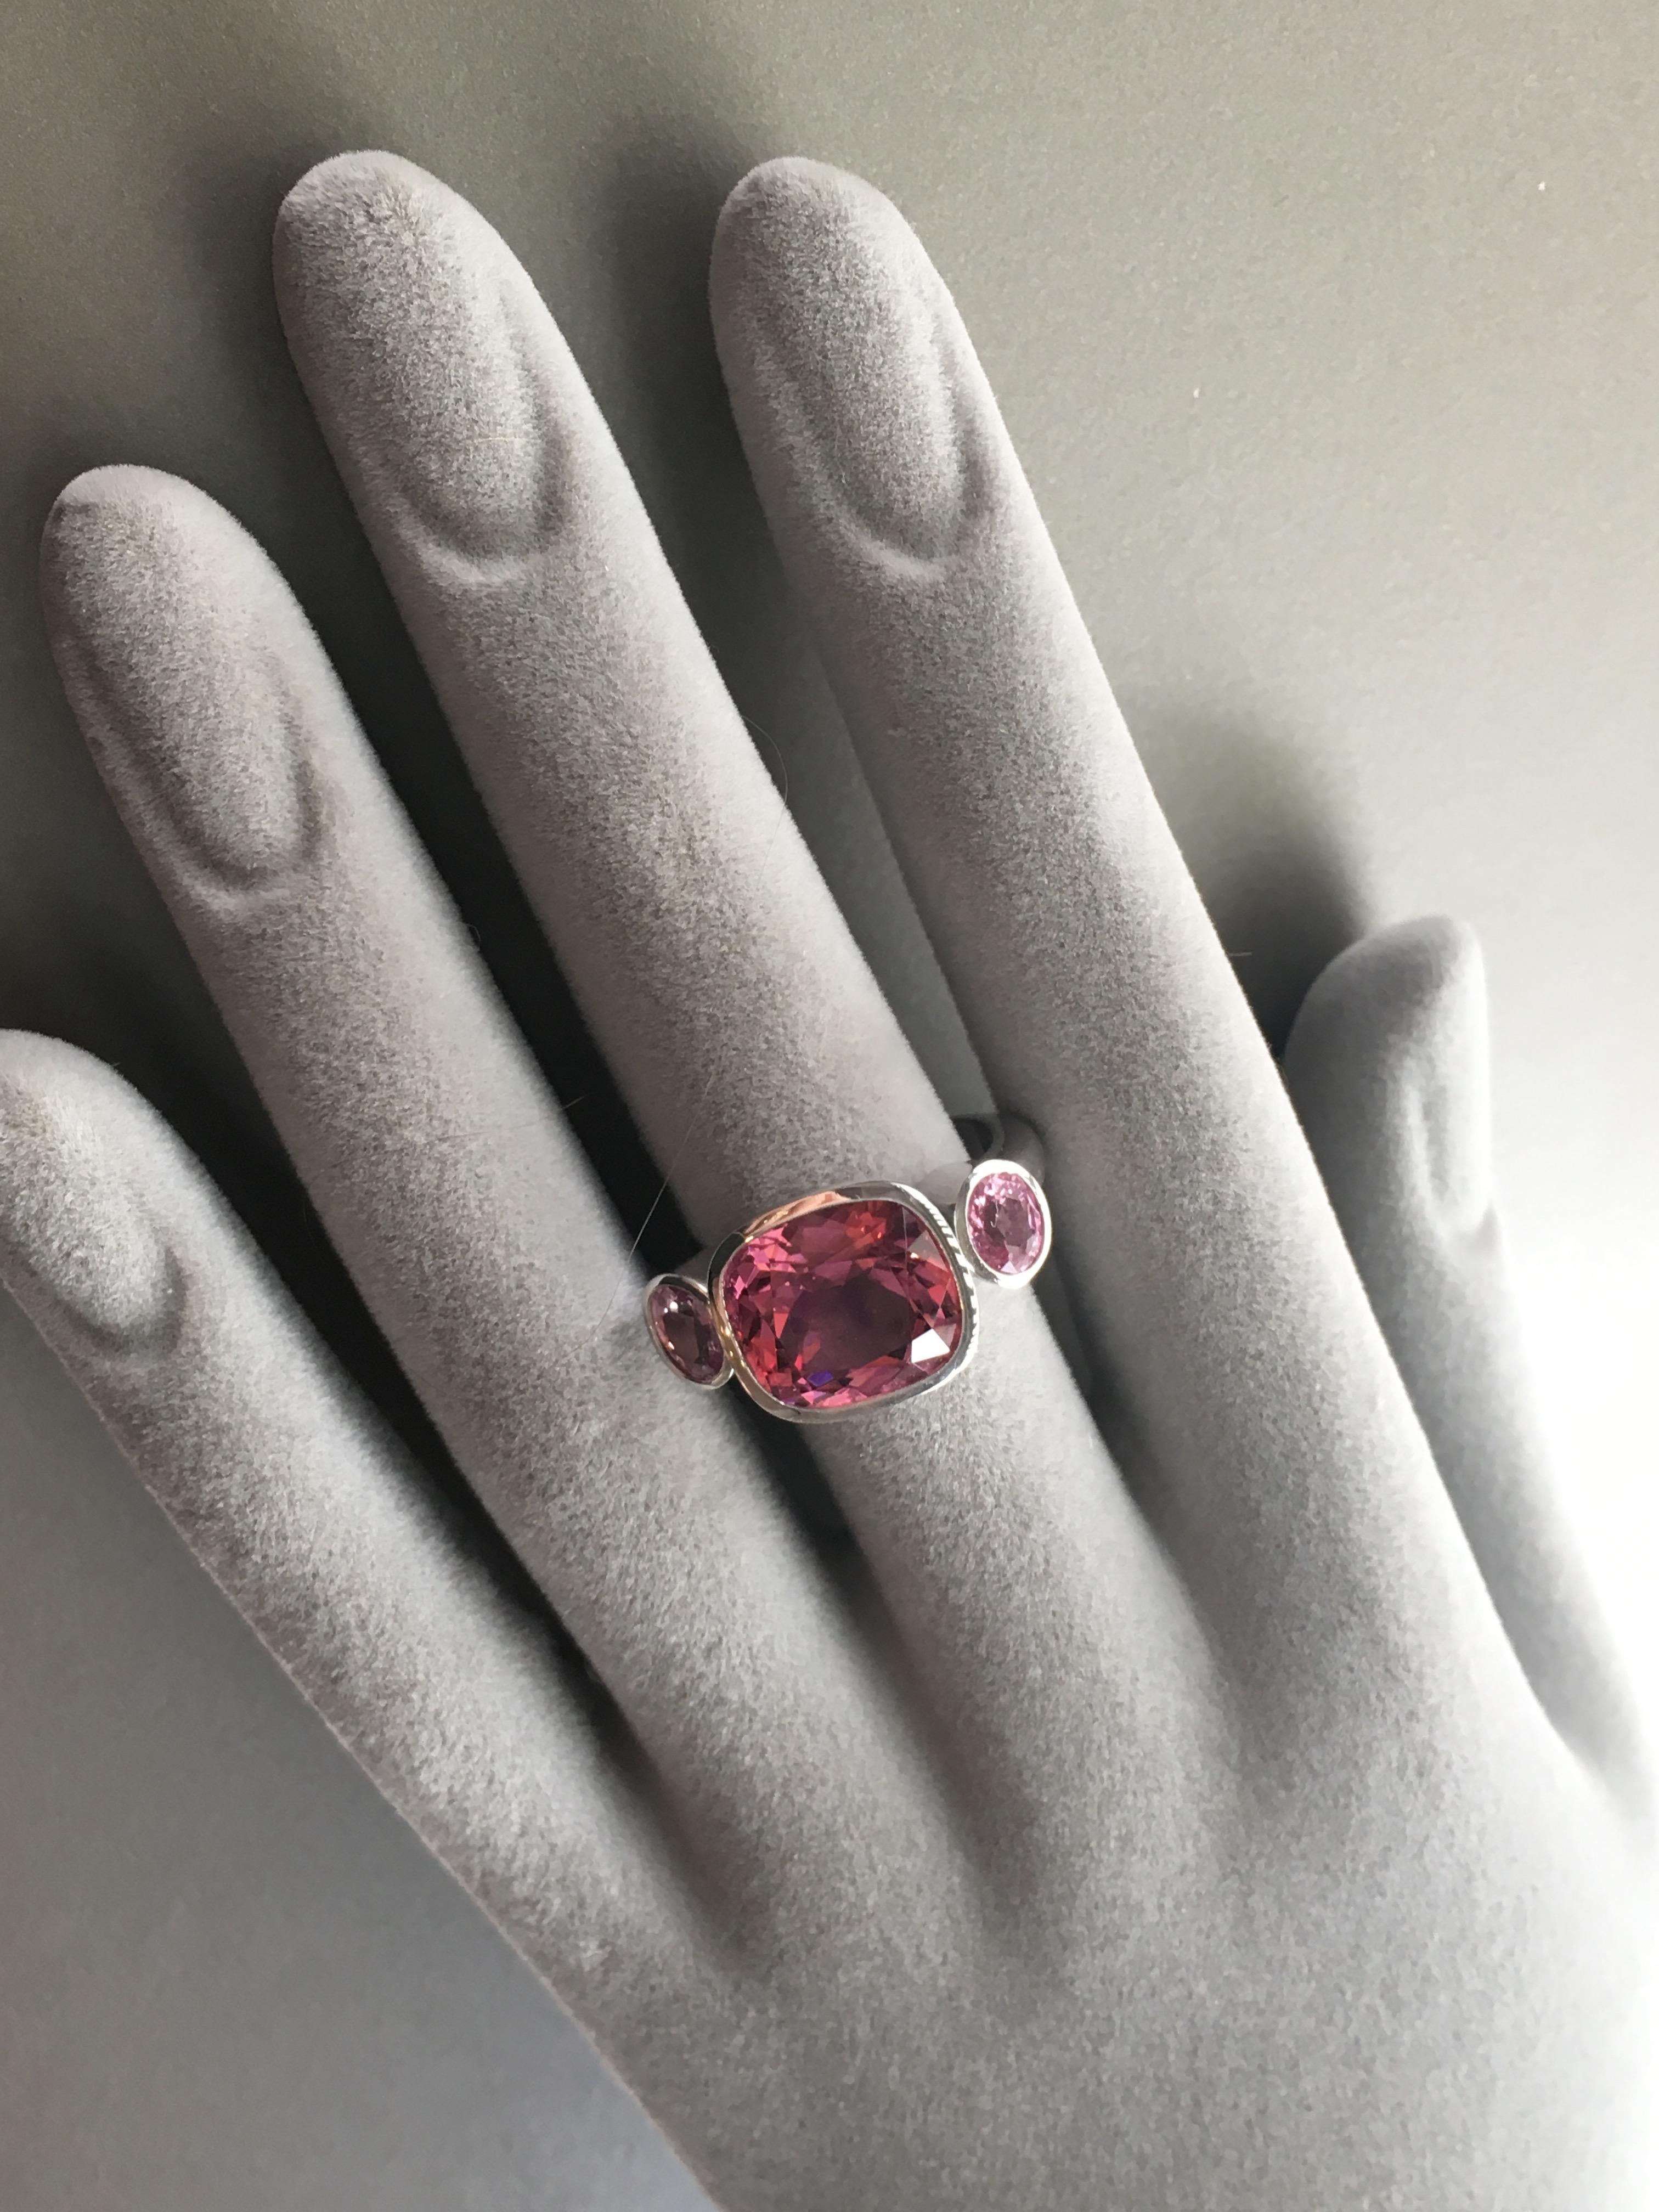 A stunning three stone ring with a  pink tourmaline cushion in the center and a pair of Padparascha oval sapphires on either side. The ring is set in 18 Karat white gold.
It can be used as a day ring or as a cocktail ring.  It would also make a